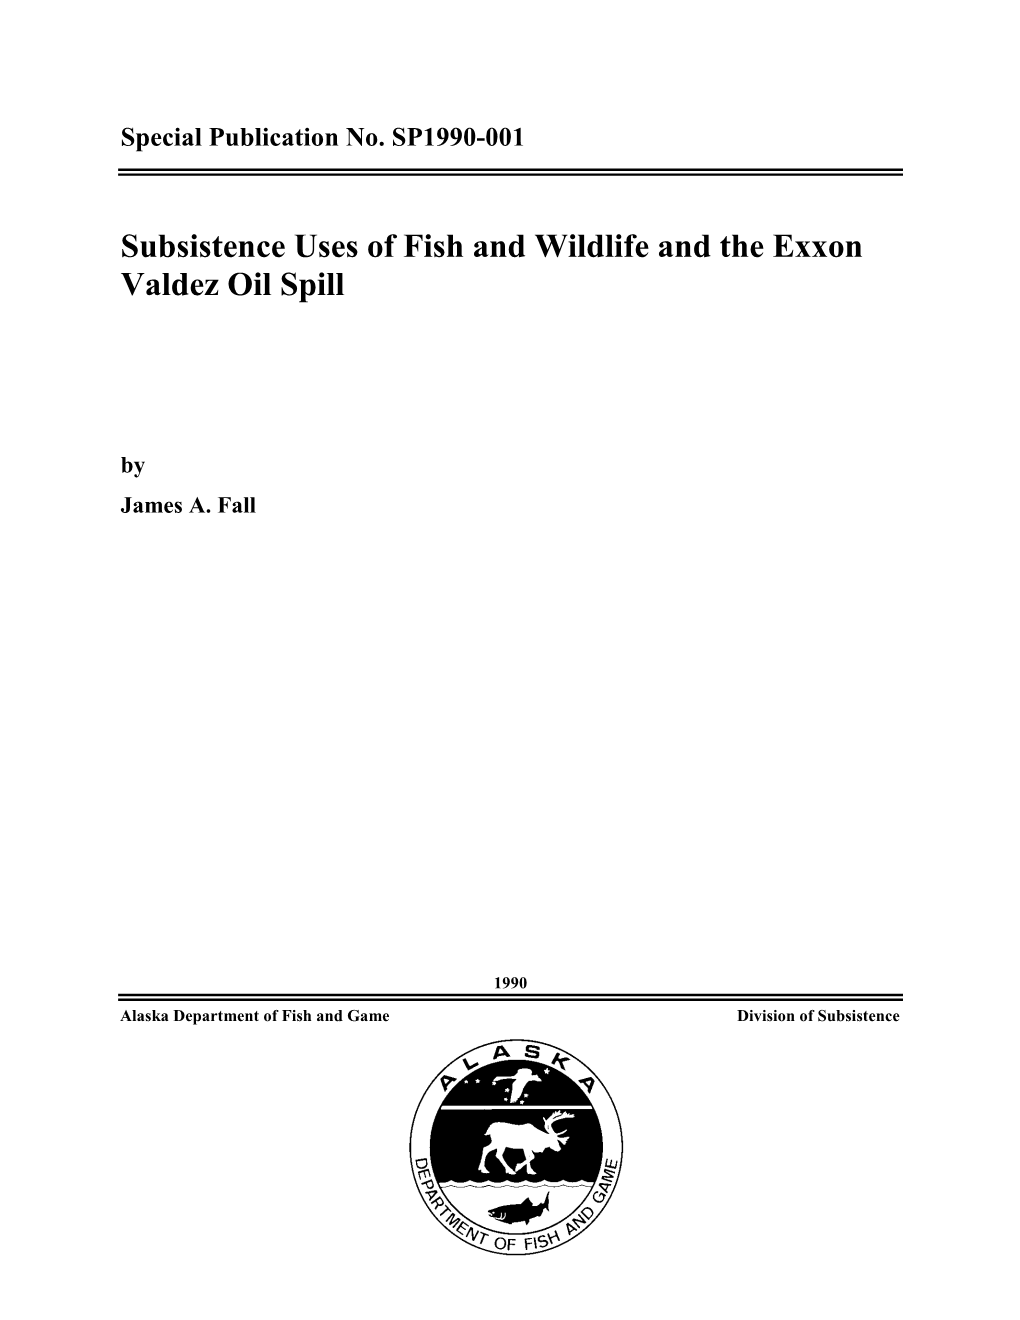 Subsistence Uses of Fish and Wildlife and the Exxon Valdez Oil Spill